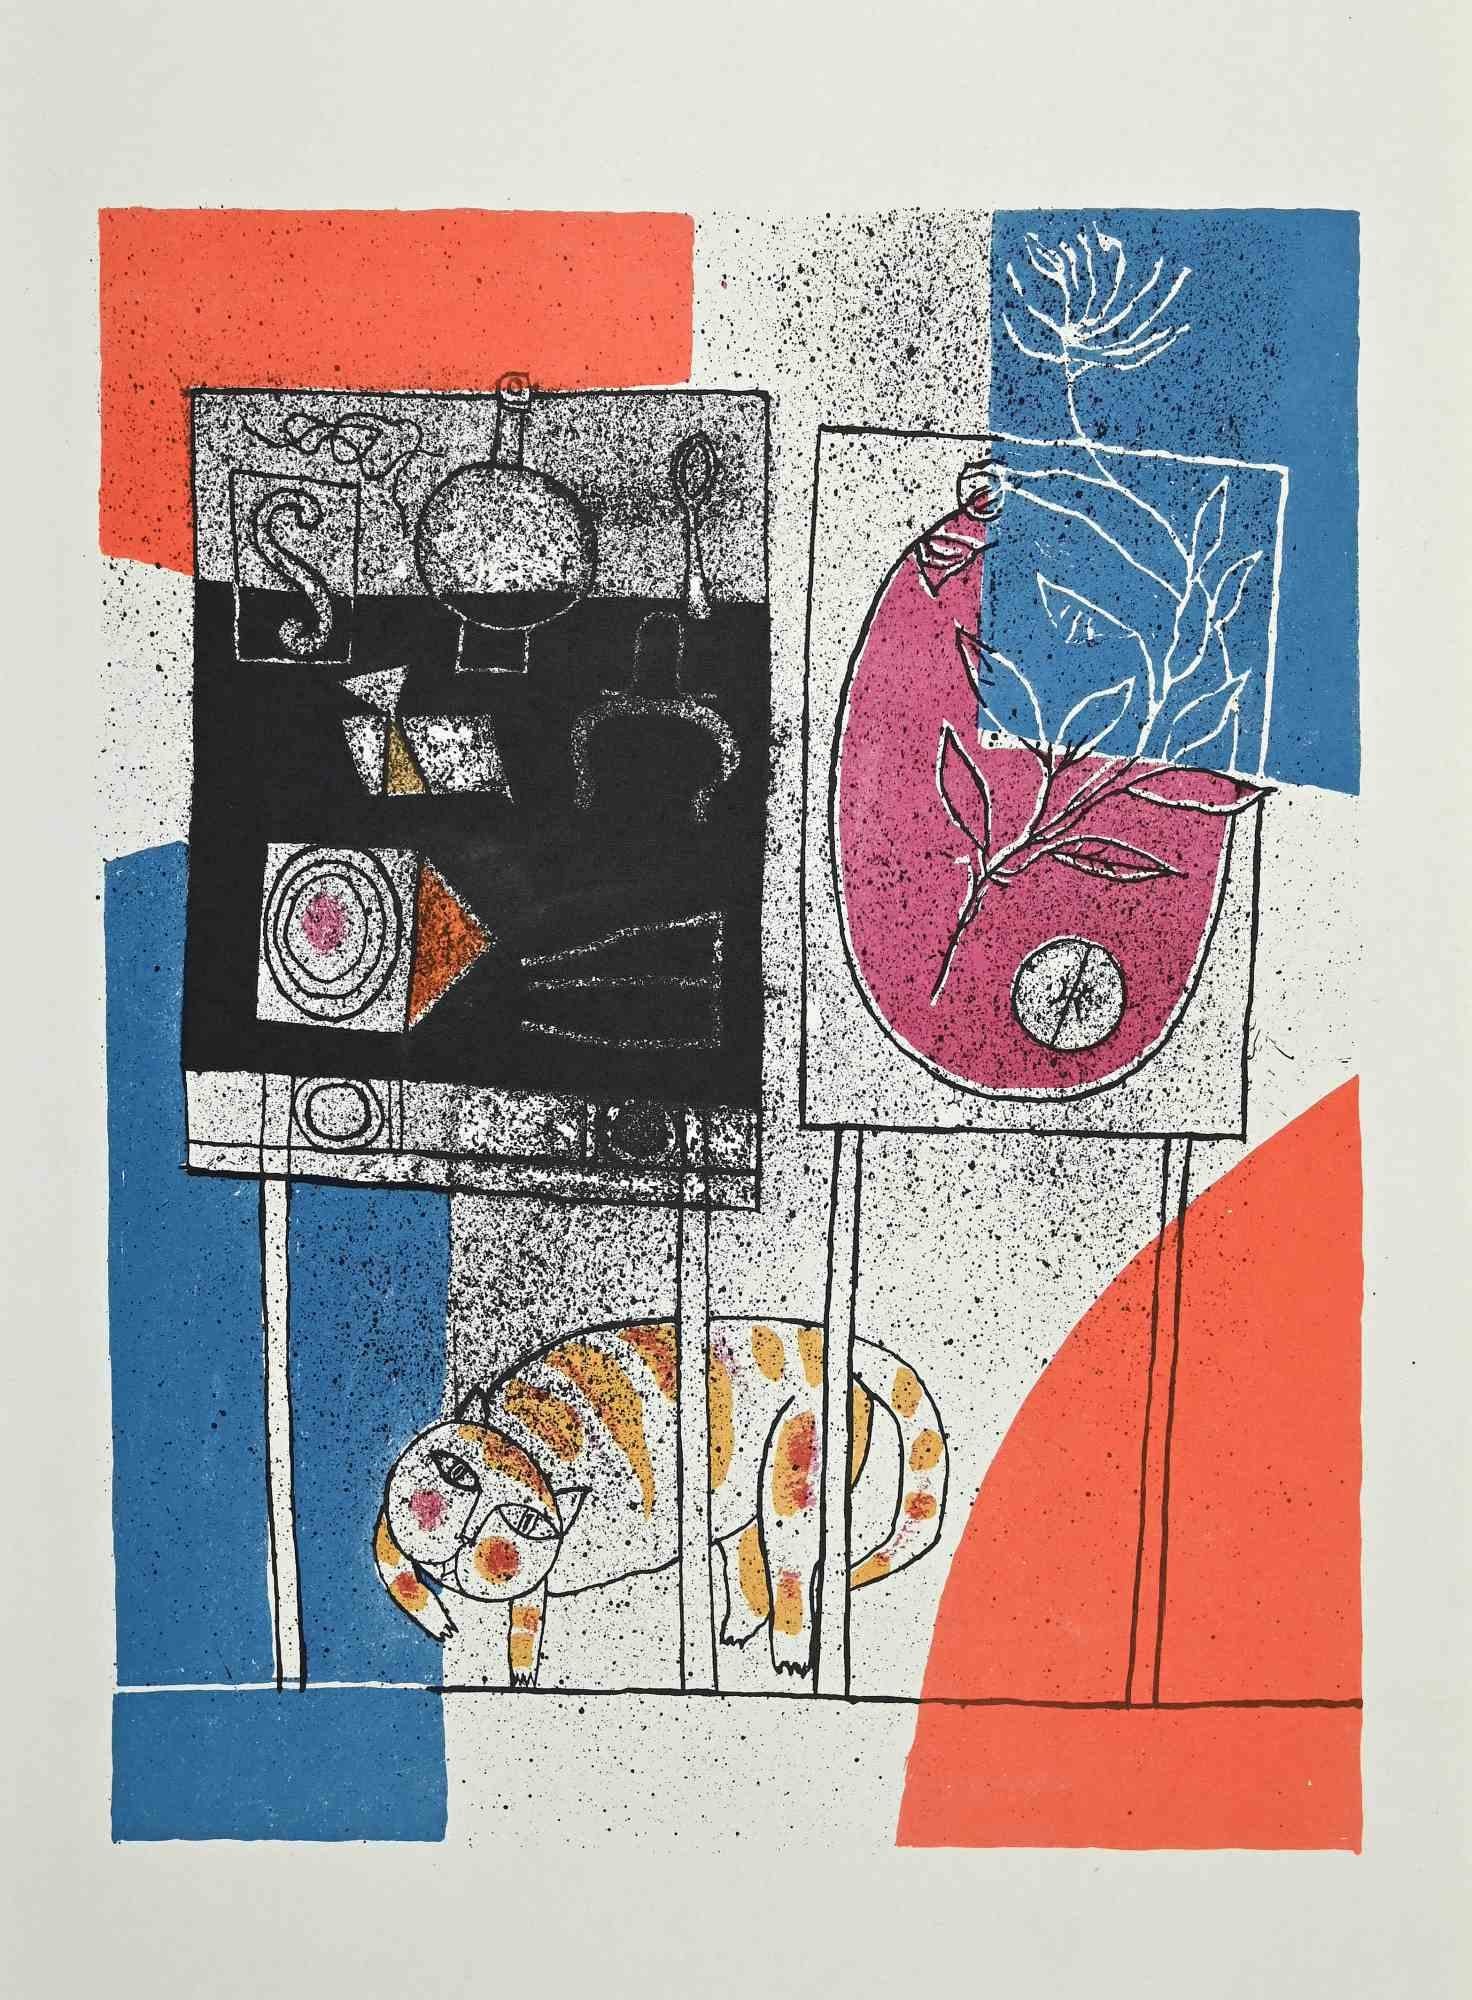 Abstract Composition is a Vintage Offset Print on ivory-colored paper, realized by Franco Gentilini ( Italian Painter, 1909-1981) in the 1970s.

The state of preservation of the artwork is excellent.

Franco Gentilini ( Italian Painter, 1909-1981):